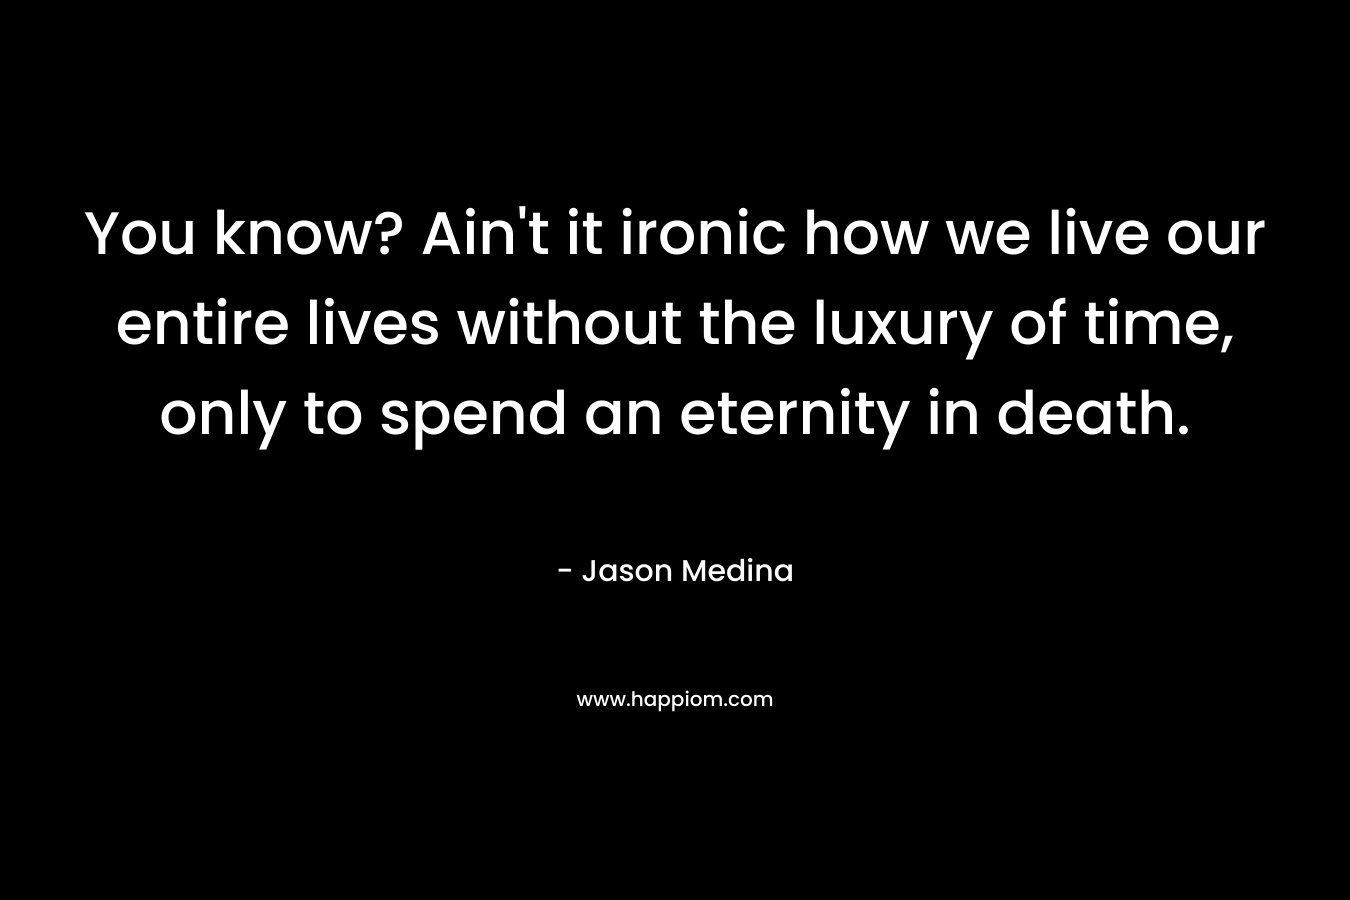 You know? Ain't it ironic how we live our entire lives without the luxury of time, only to spend an eternity in death.